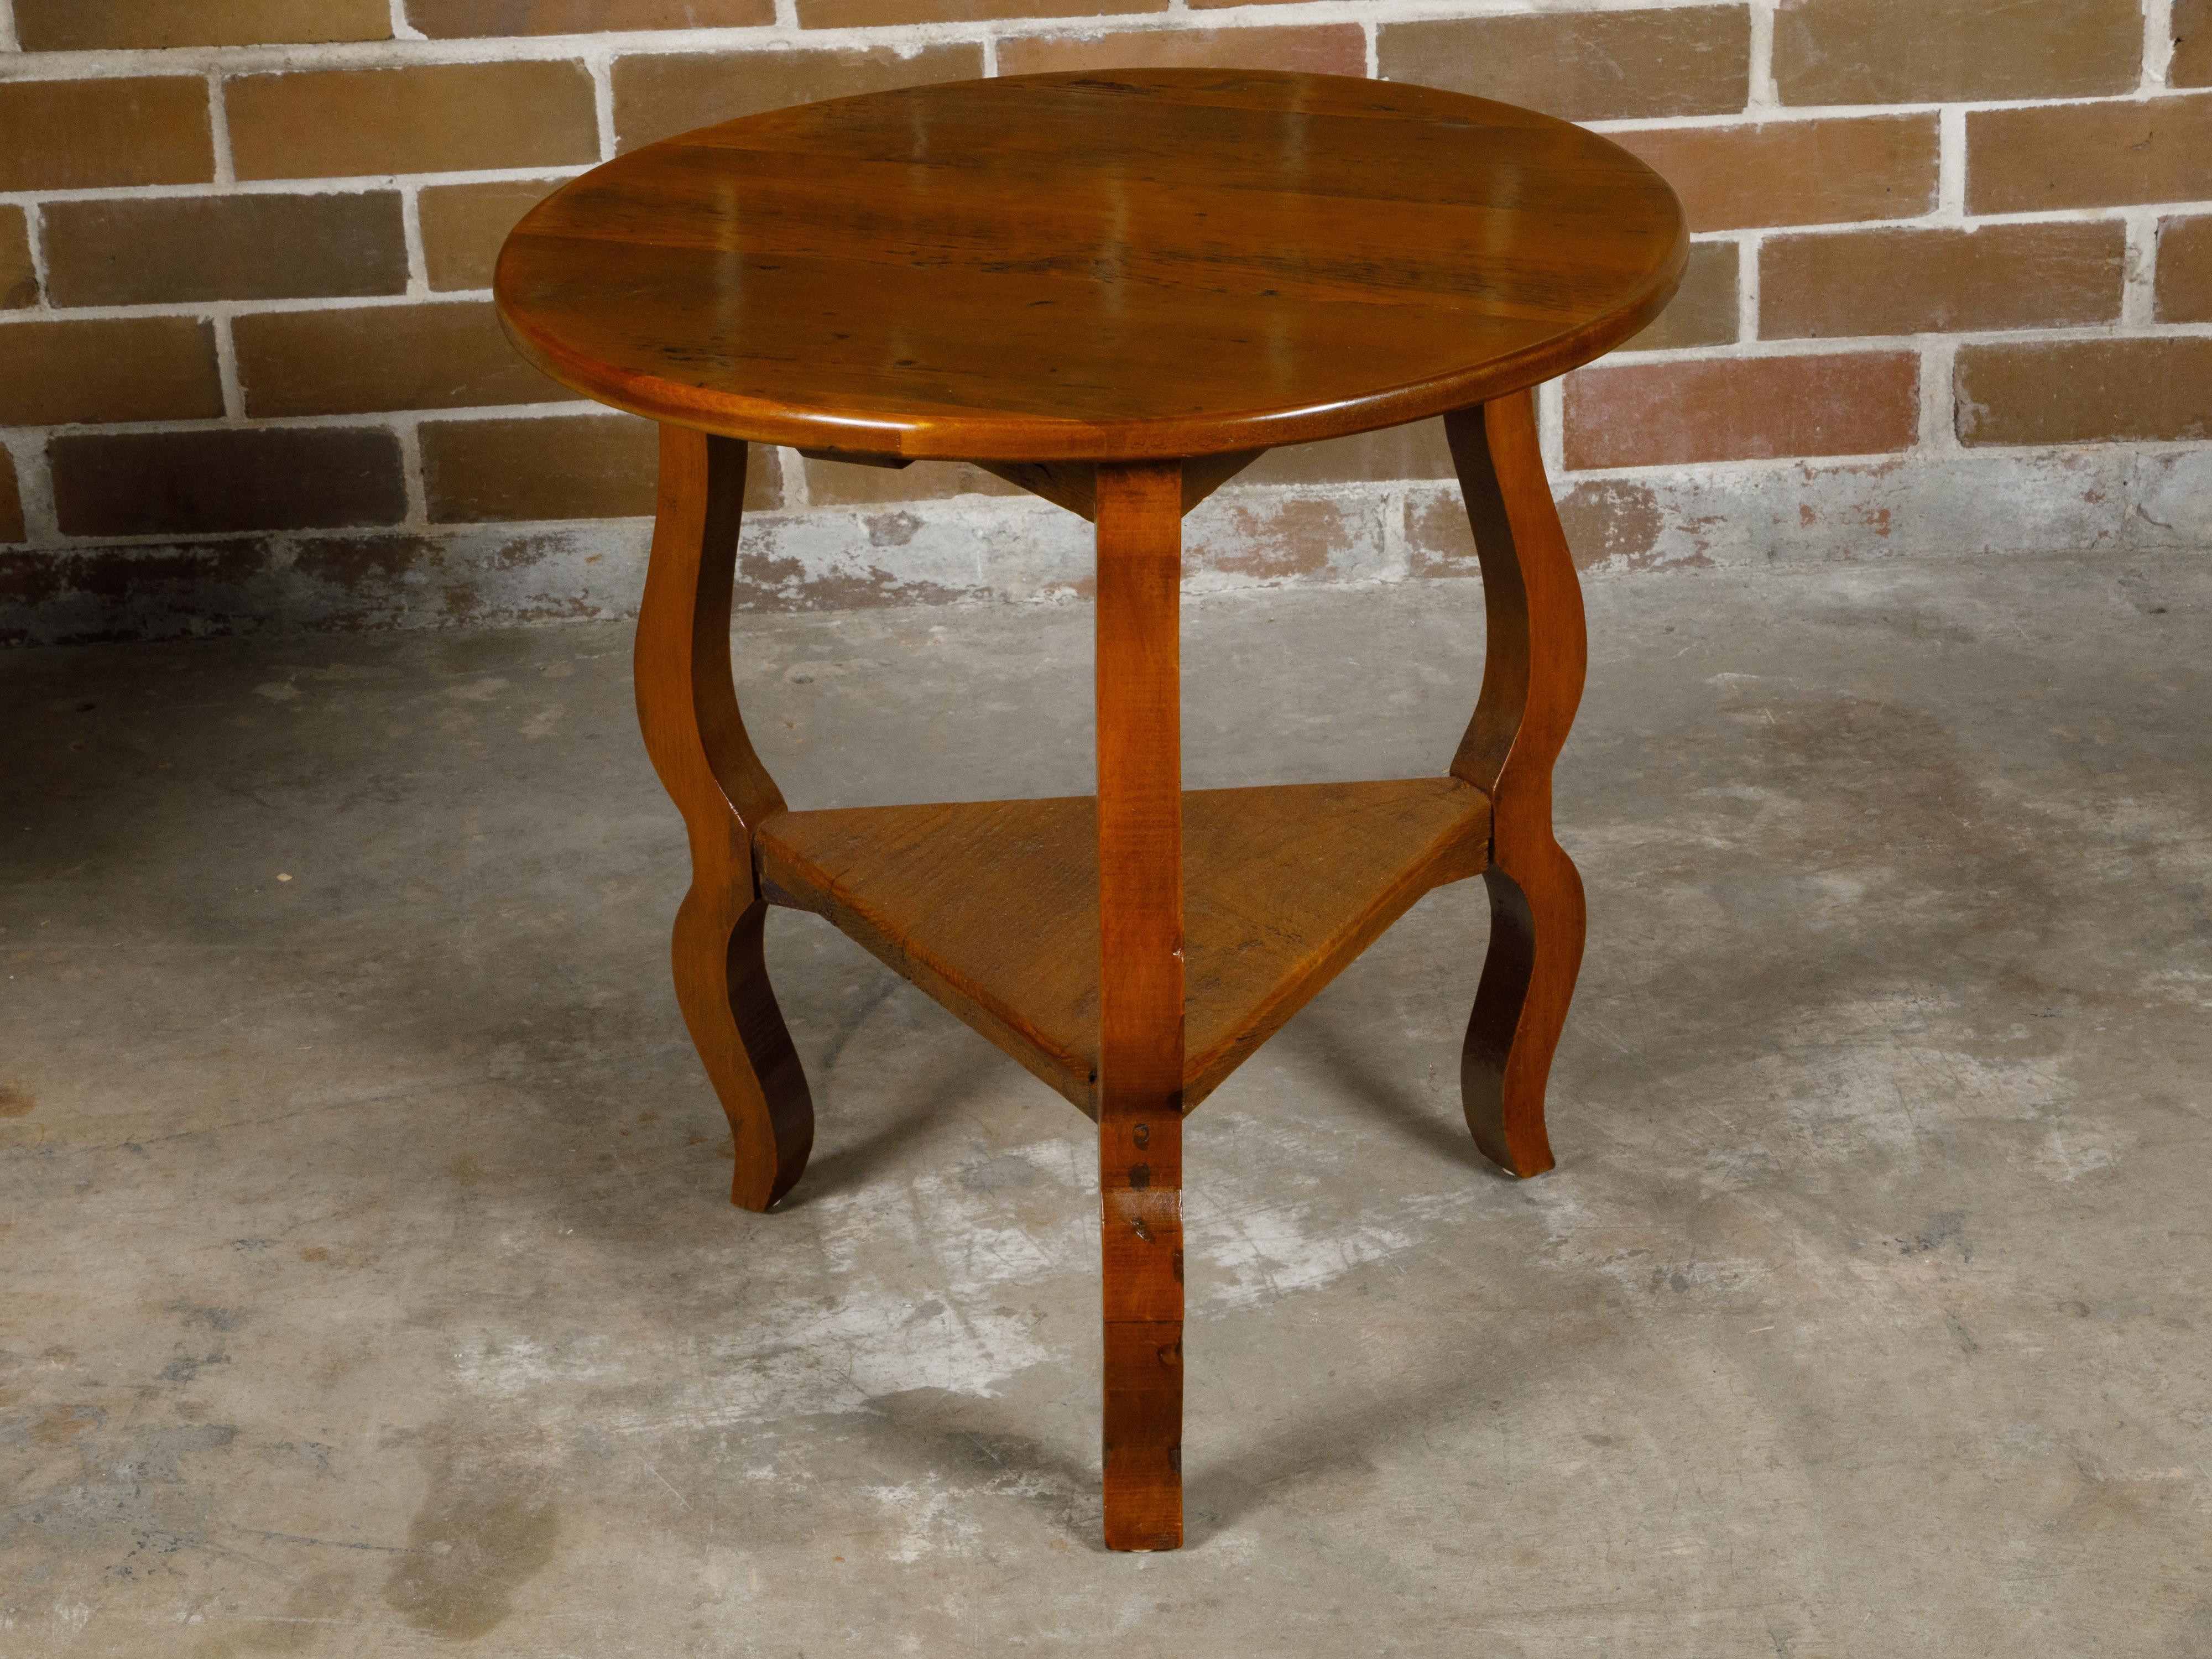 English Pine Side Table with Circular Top, Curving Legs and Triangular Shelf For Sale 8